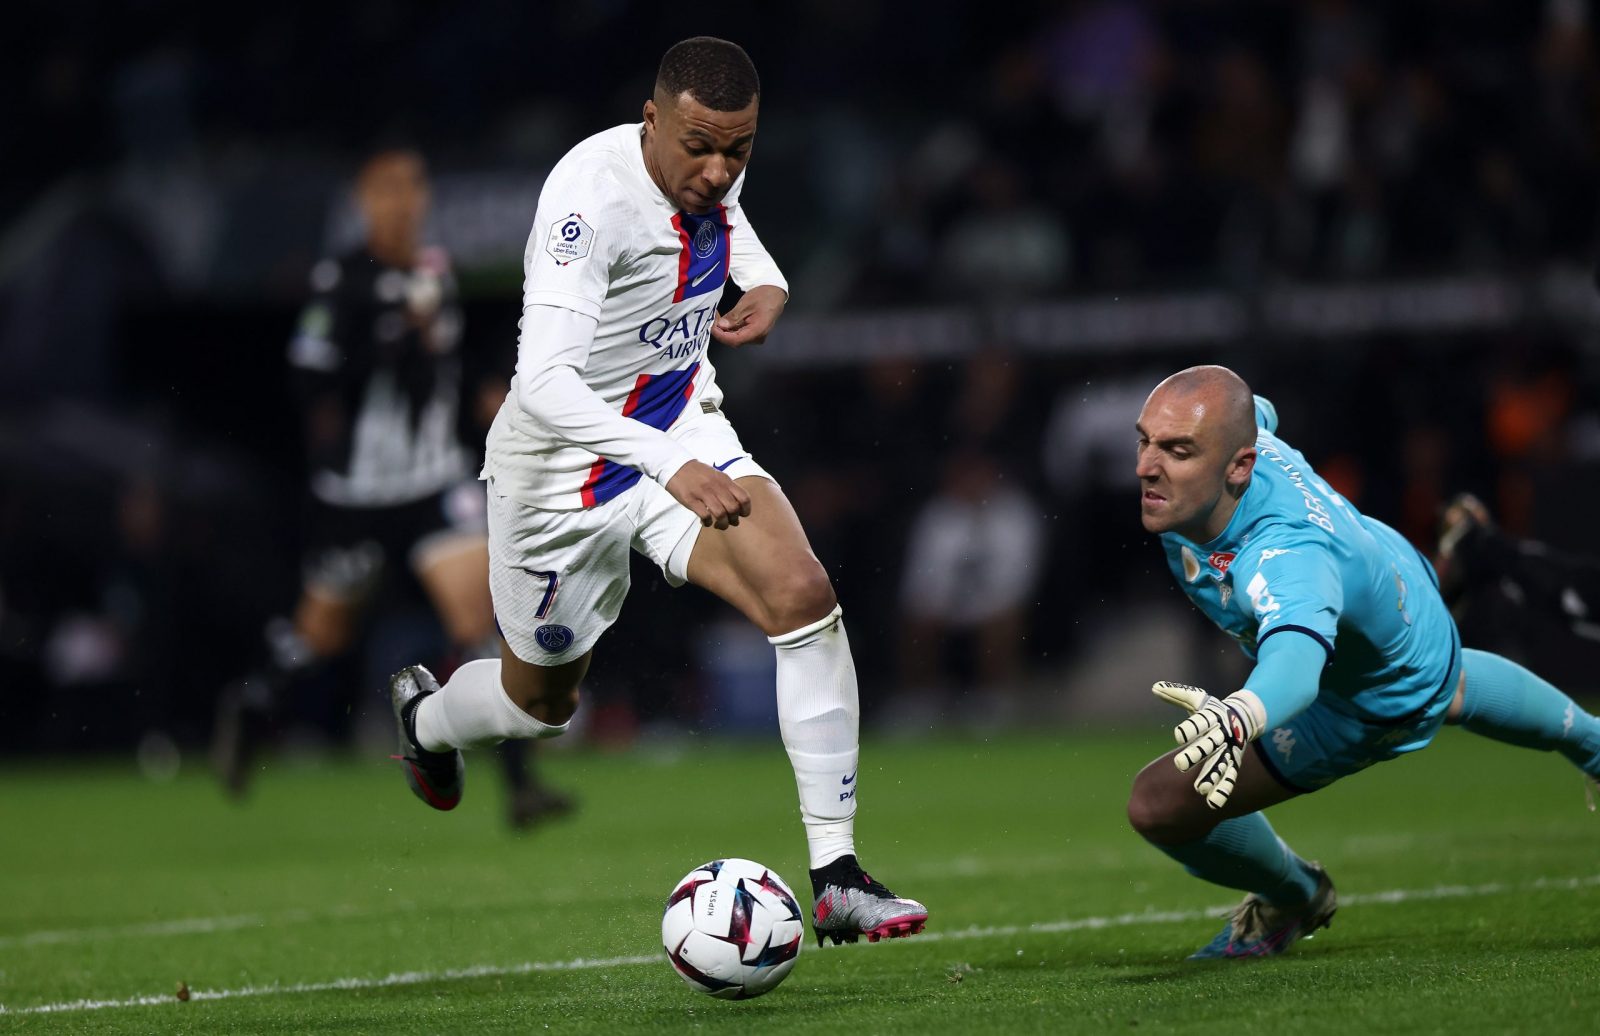 epa10584552 Kylian Mbappe of PSG (L) of Paris scores the 0-2 lead goal against Angers goalkeeper Paul Bernardoni (R)  during the French Ligue 1 soccer match between Angers and Paris Saint Germain in Angers, France, 21 April 2023.  EPA/MOHAMMED BADRA